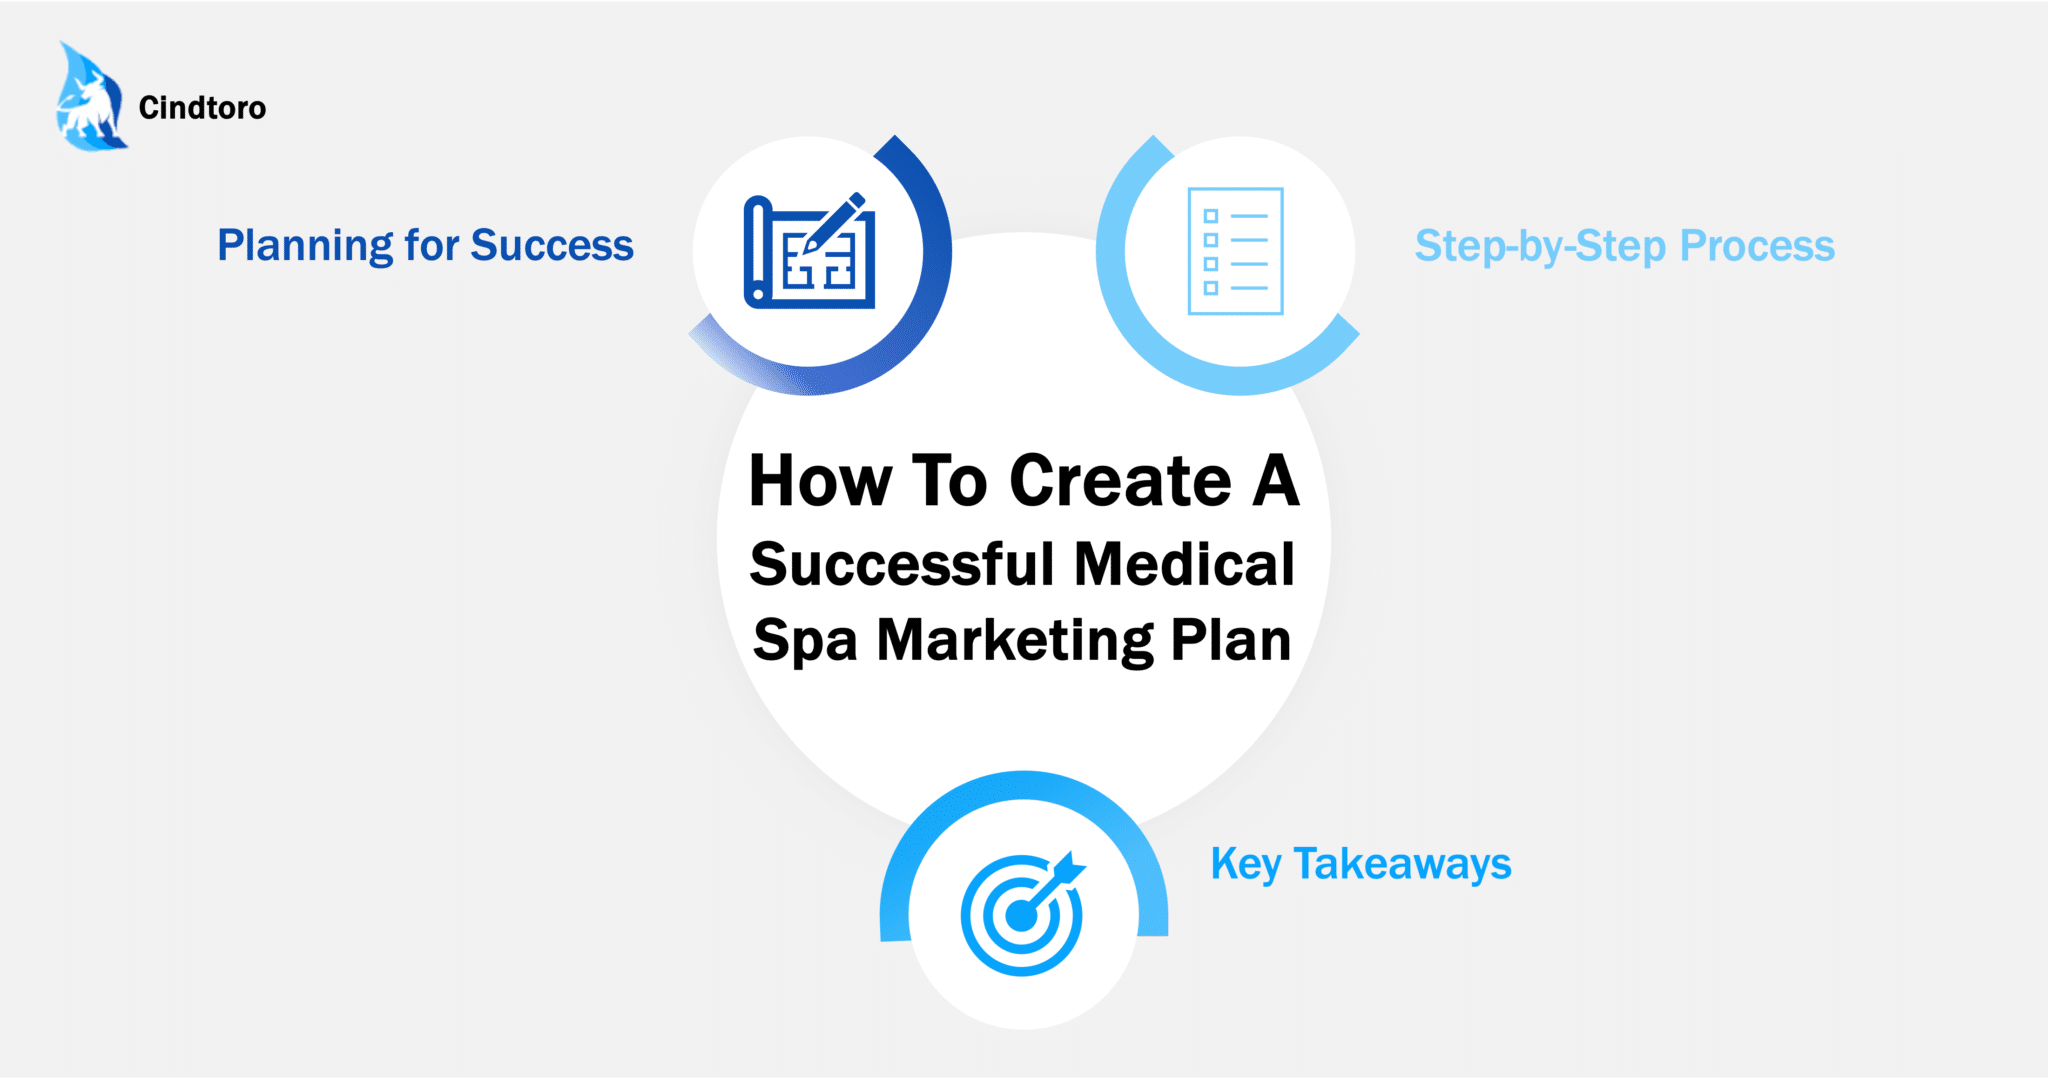 How To Create A Successful Medical Spa Marketing Plan